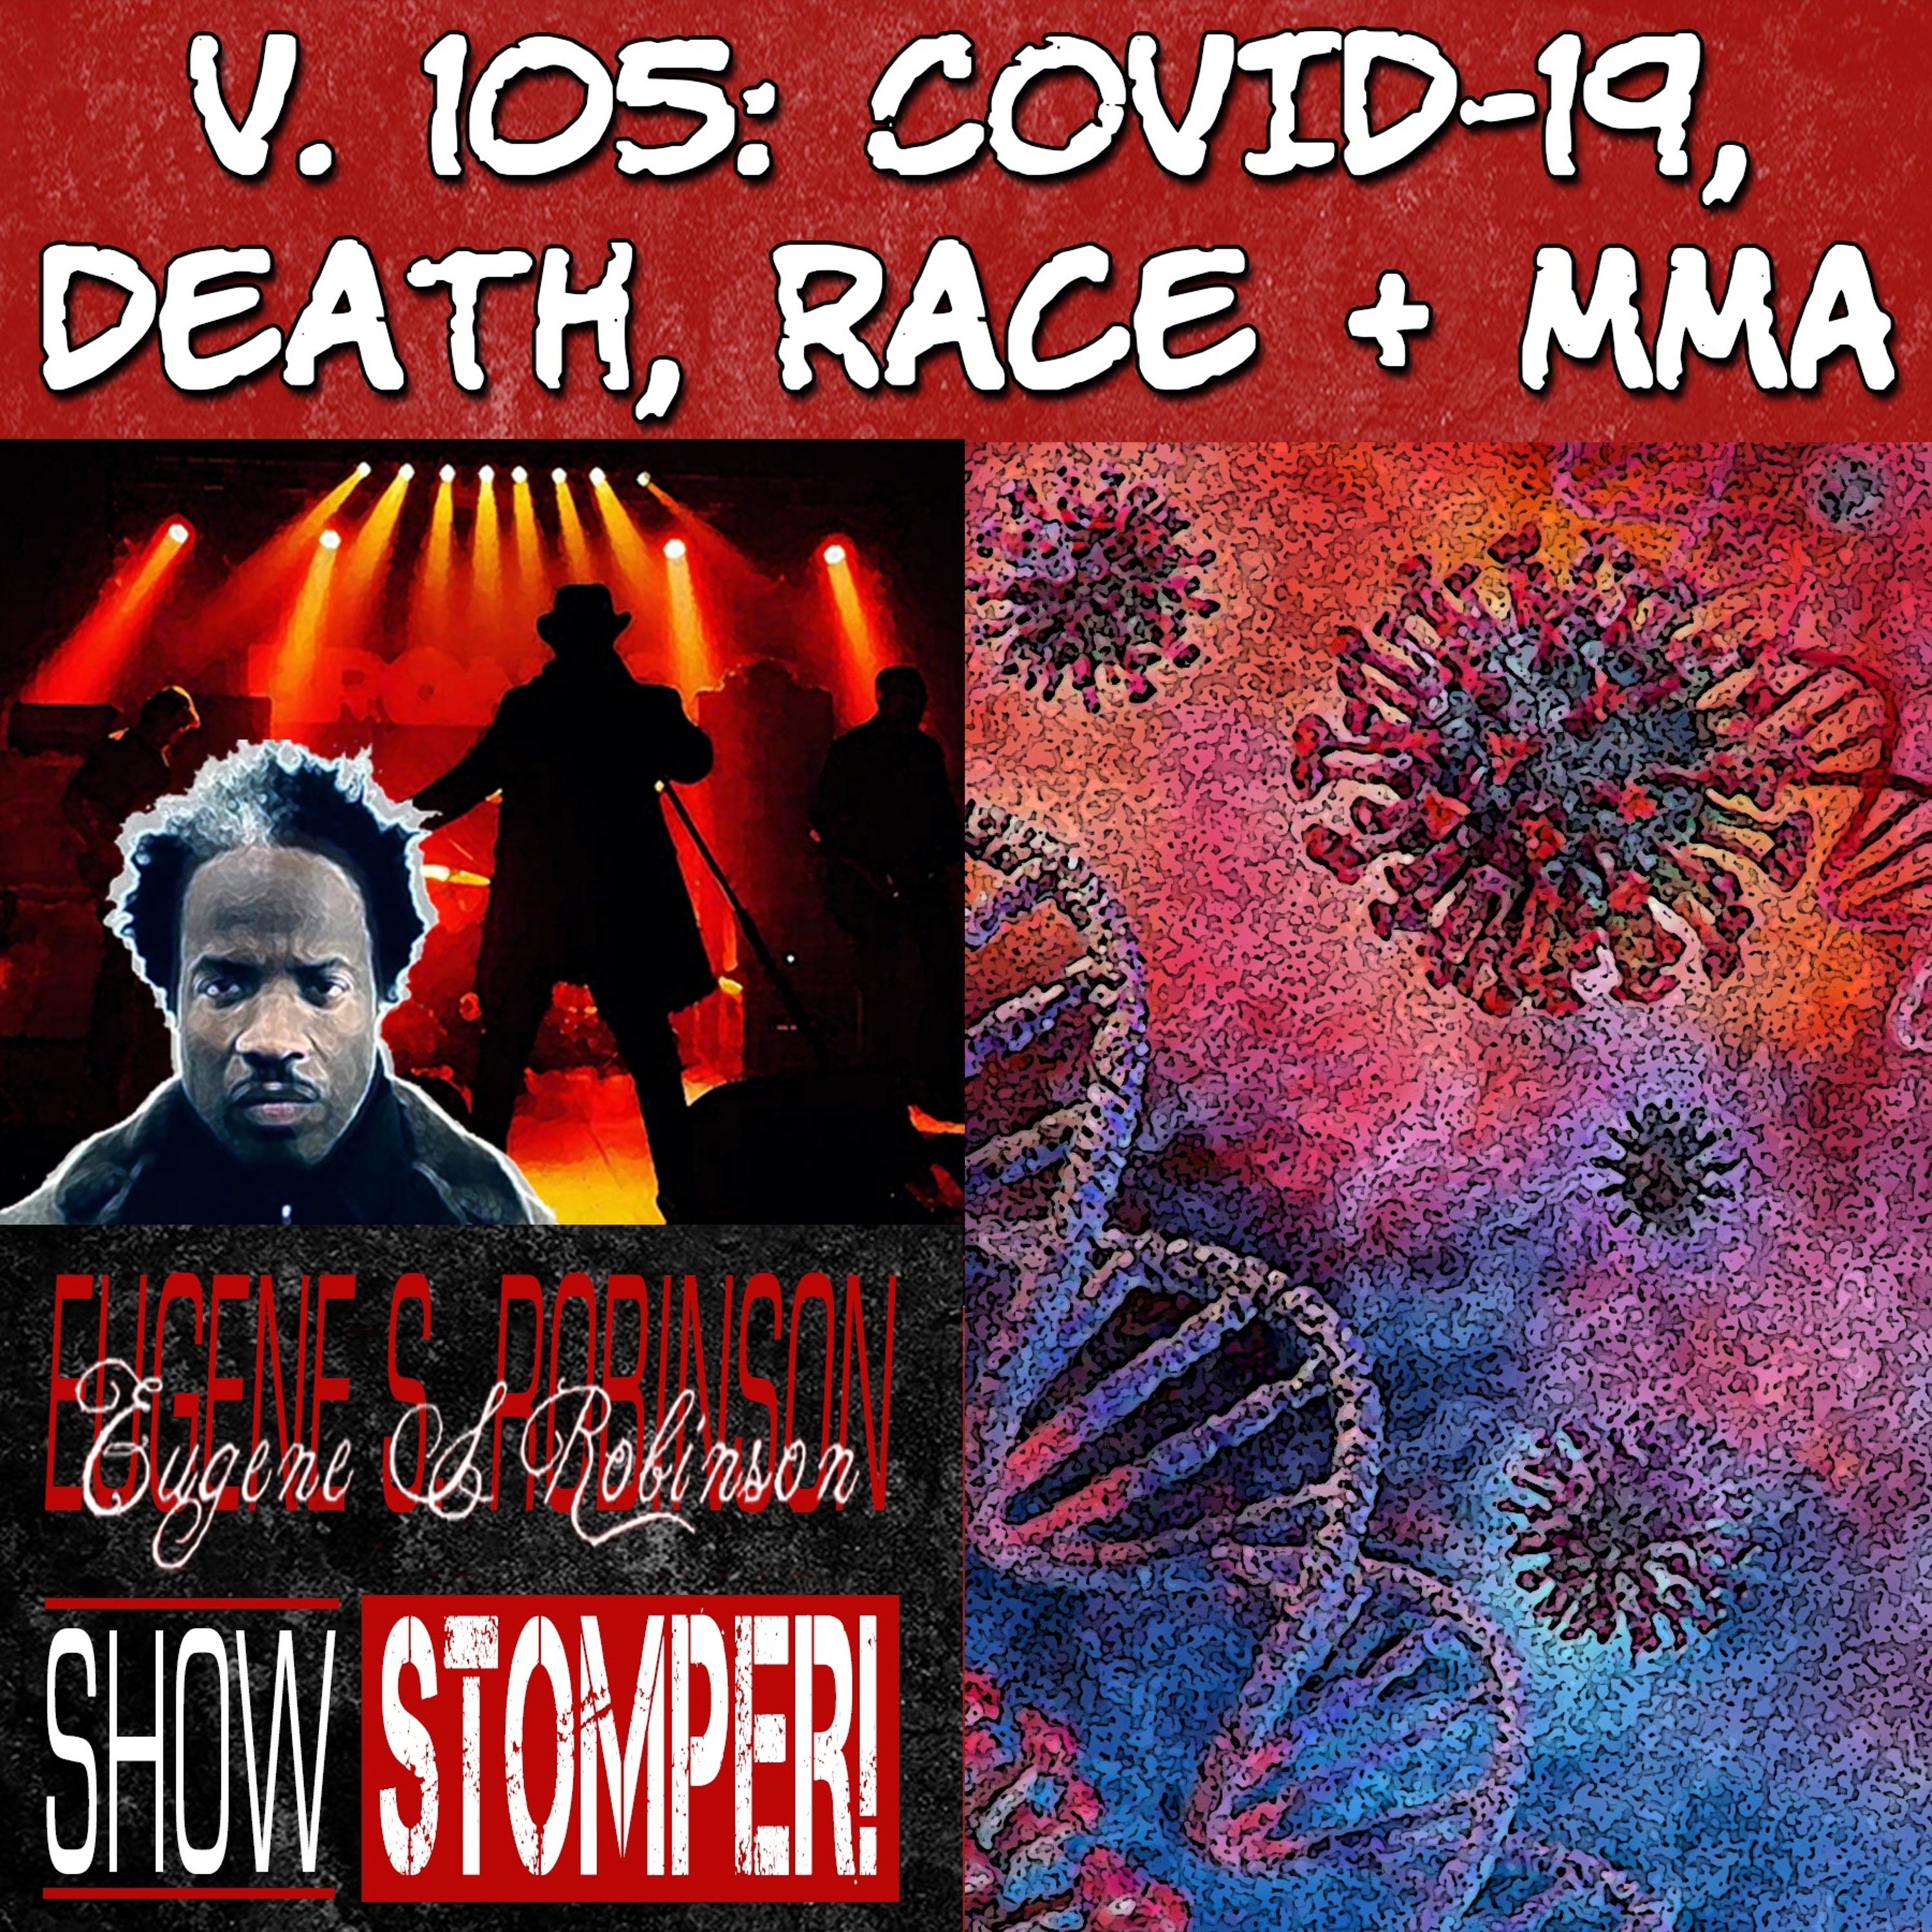 The REAL V.105 COVID - 19, Death, Race + MMA All On The Eugene S. Robinson Show Stomper!